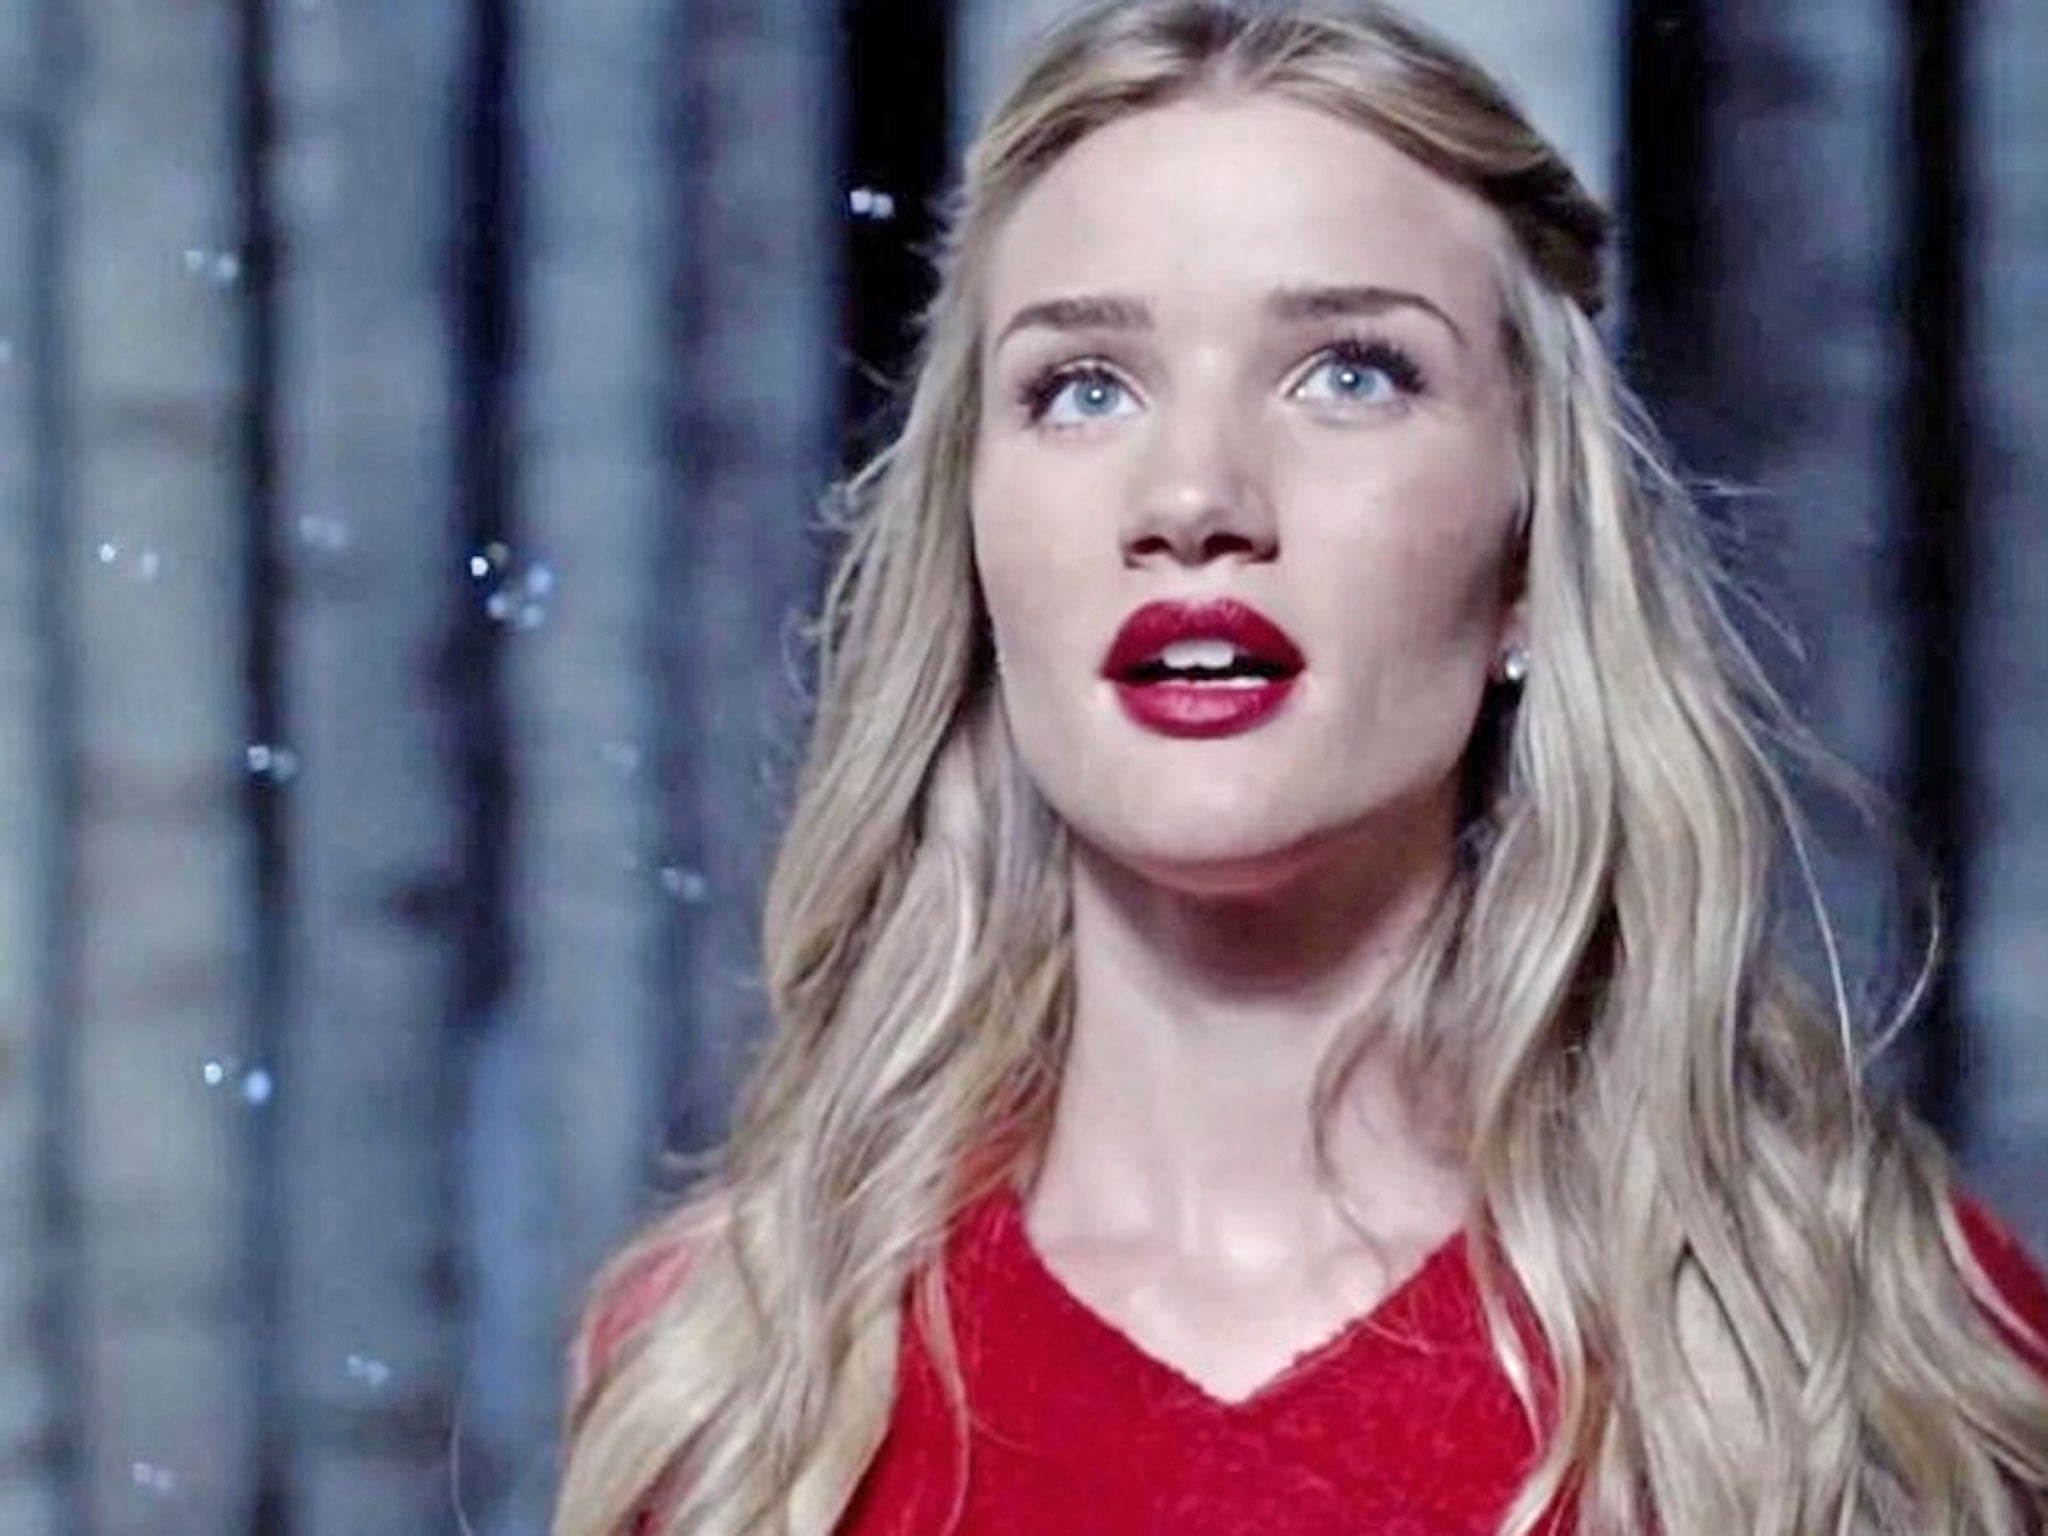 Rosie Huntington-Whiteley in the Marks and Spencer's Christmas ad